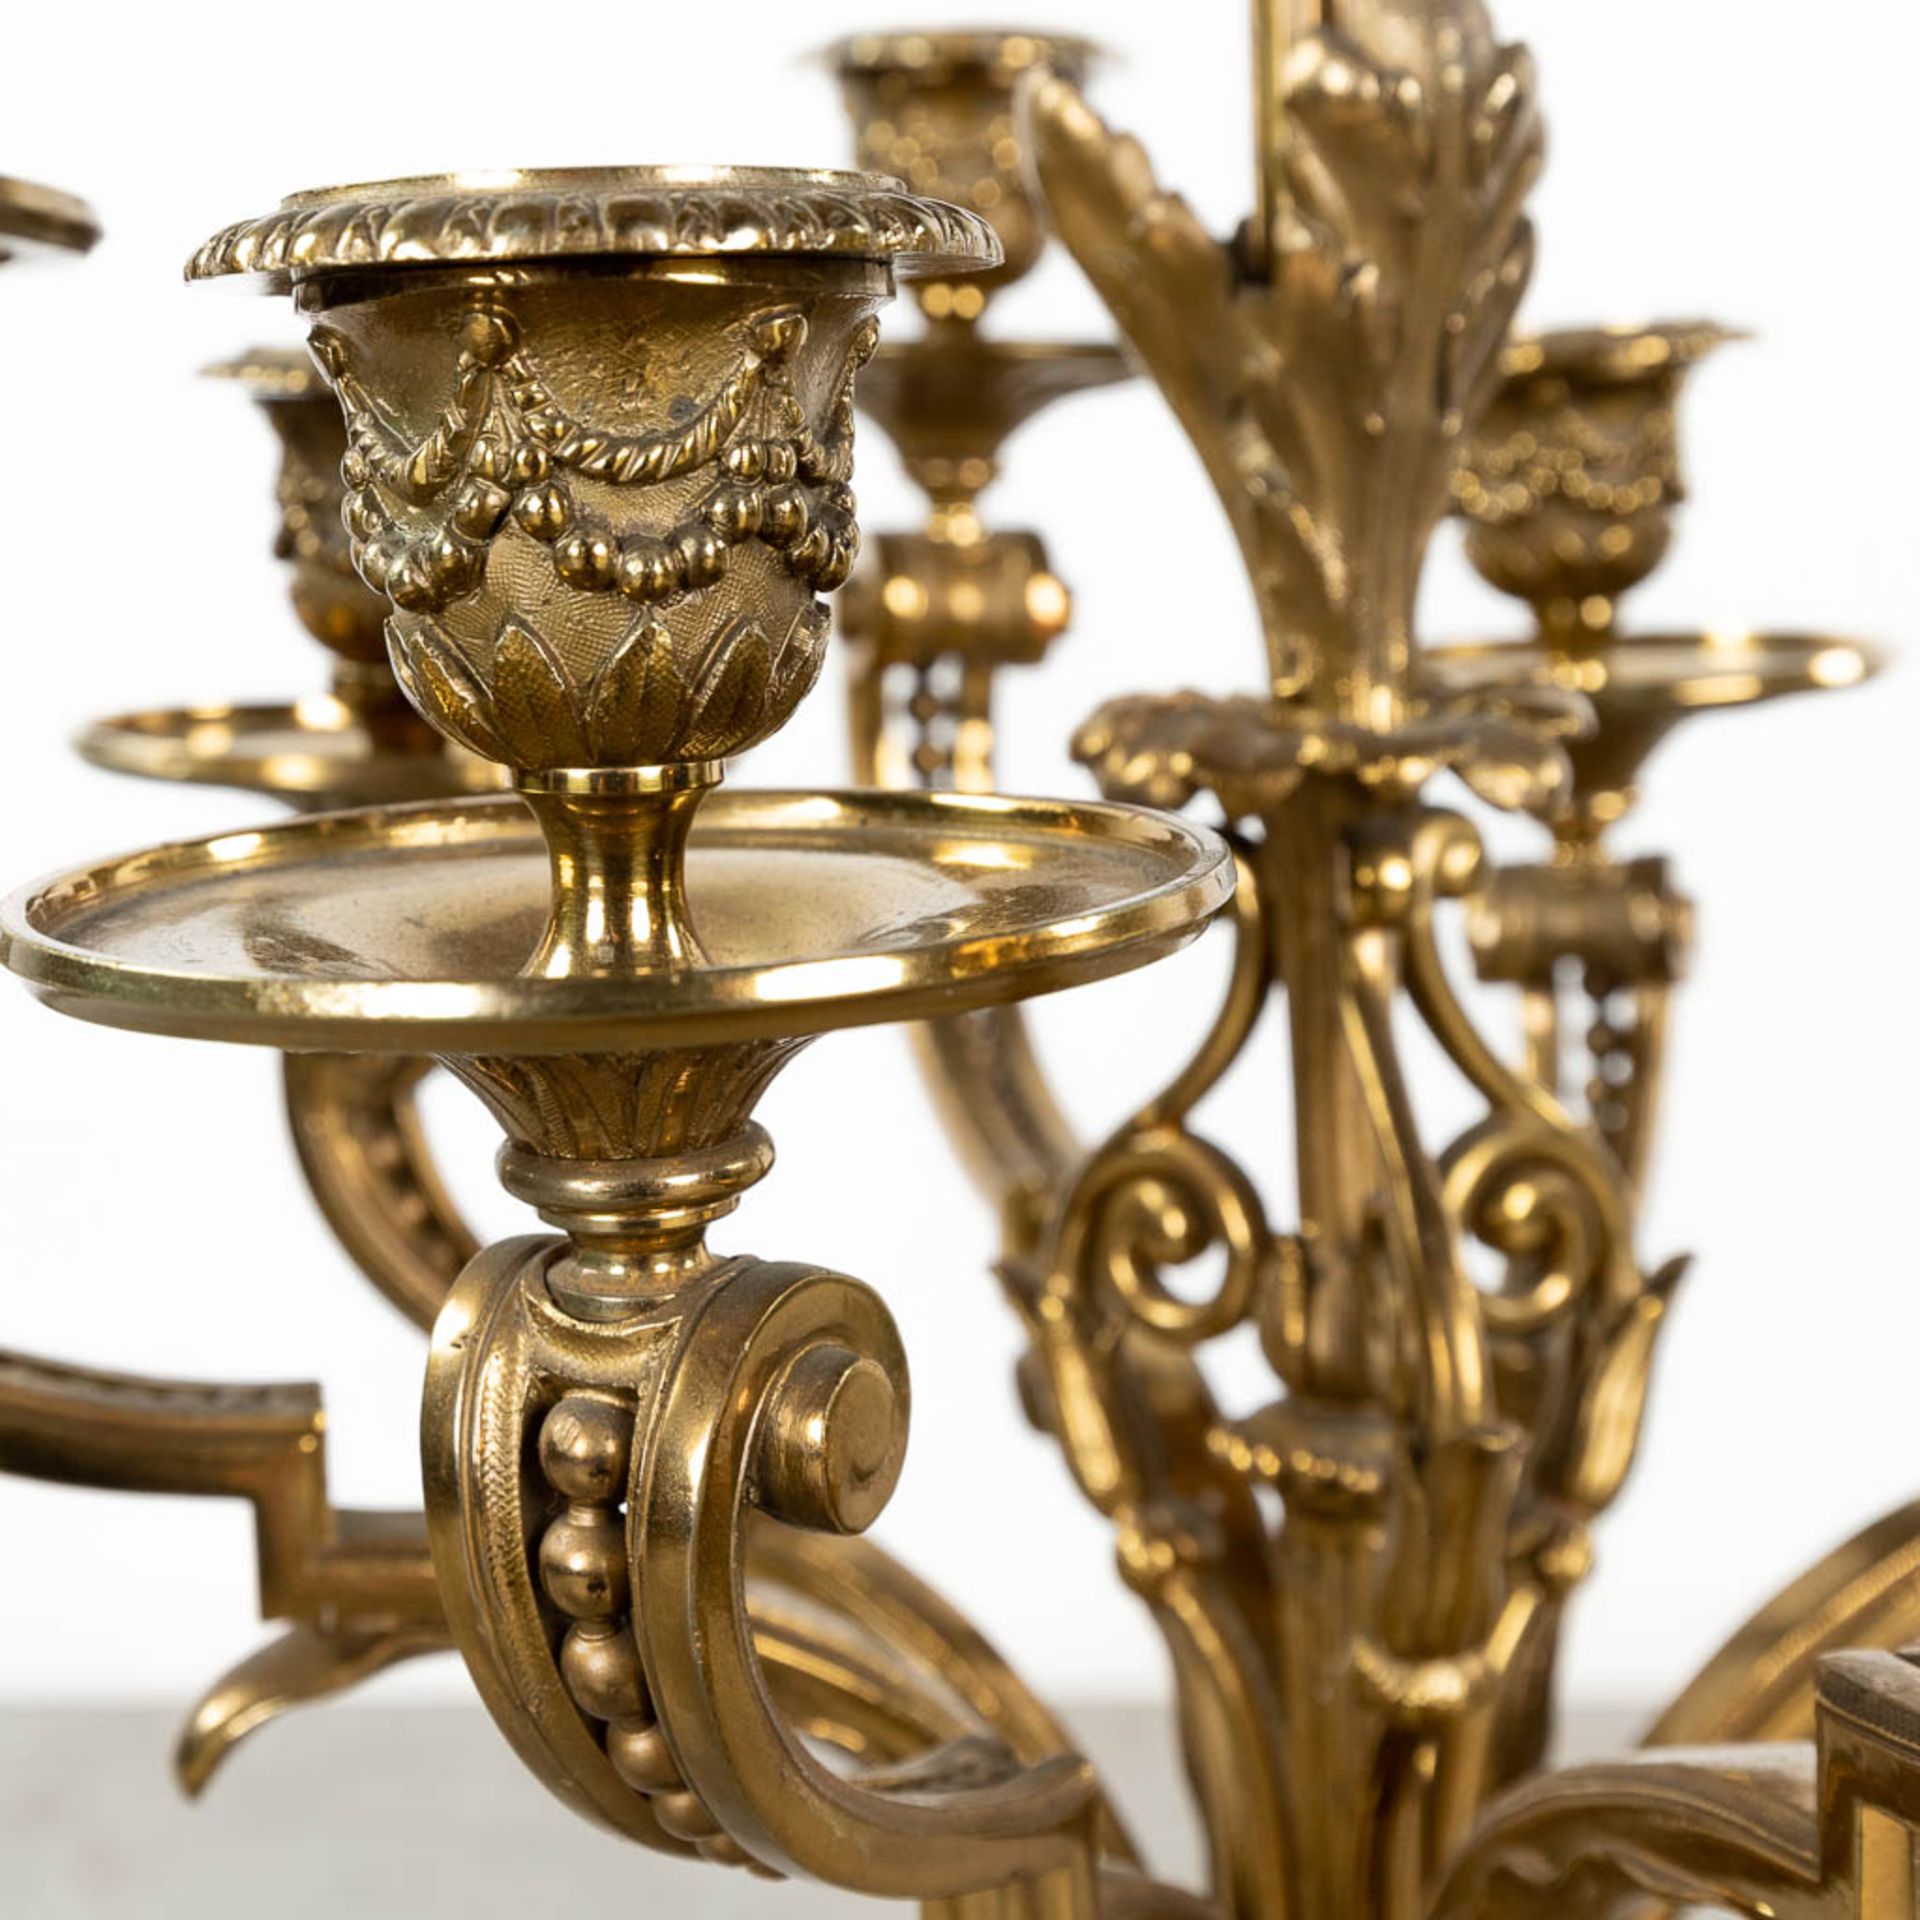 A pair of large neoclassical candelabra made of polished bronze. (L:30 x W:30 x H:90 x D:42,5 cm) - Image 9 of 12